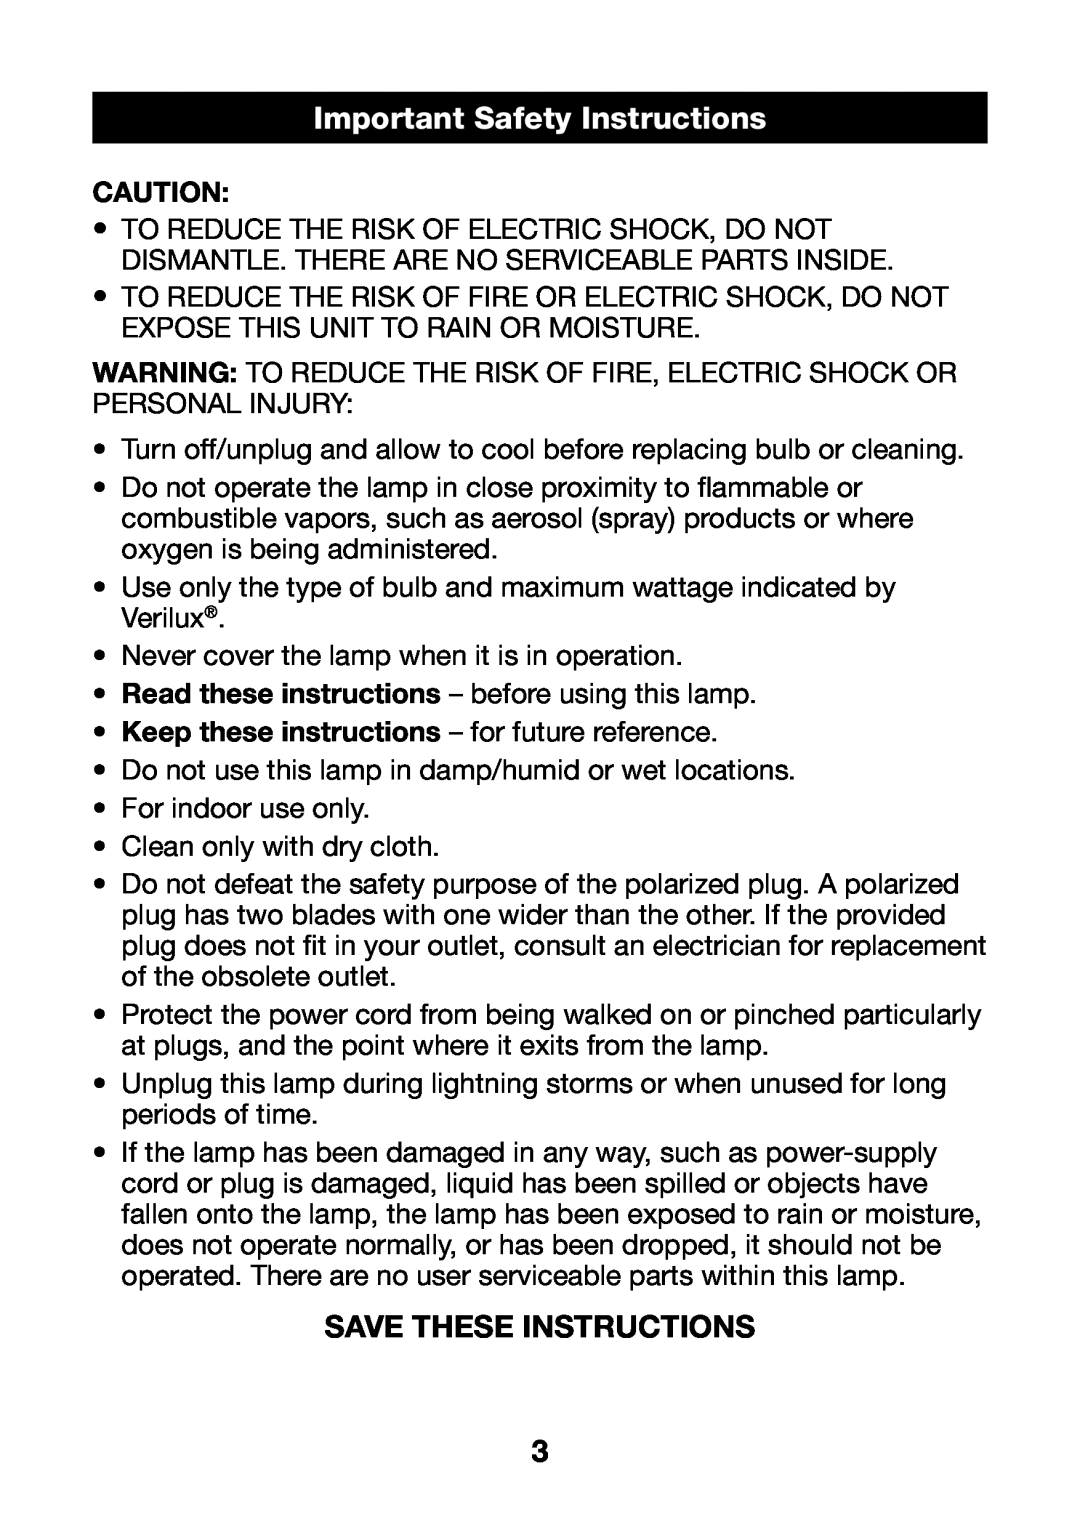 Verilux VD07 manual Important Safety Instructions, Save These Instructions, Keep these instructions - for future reference 